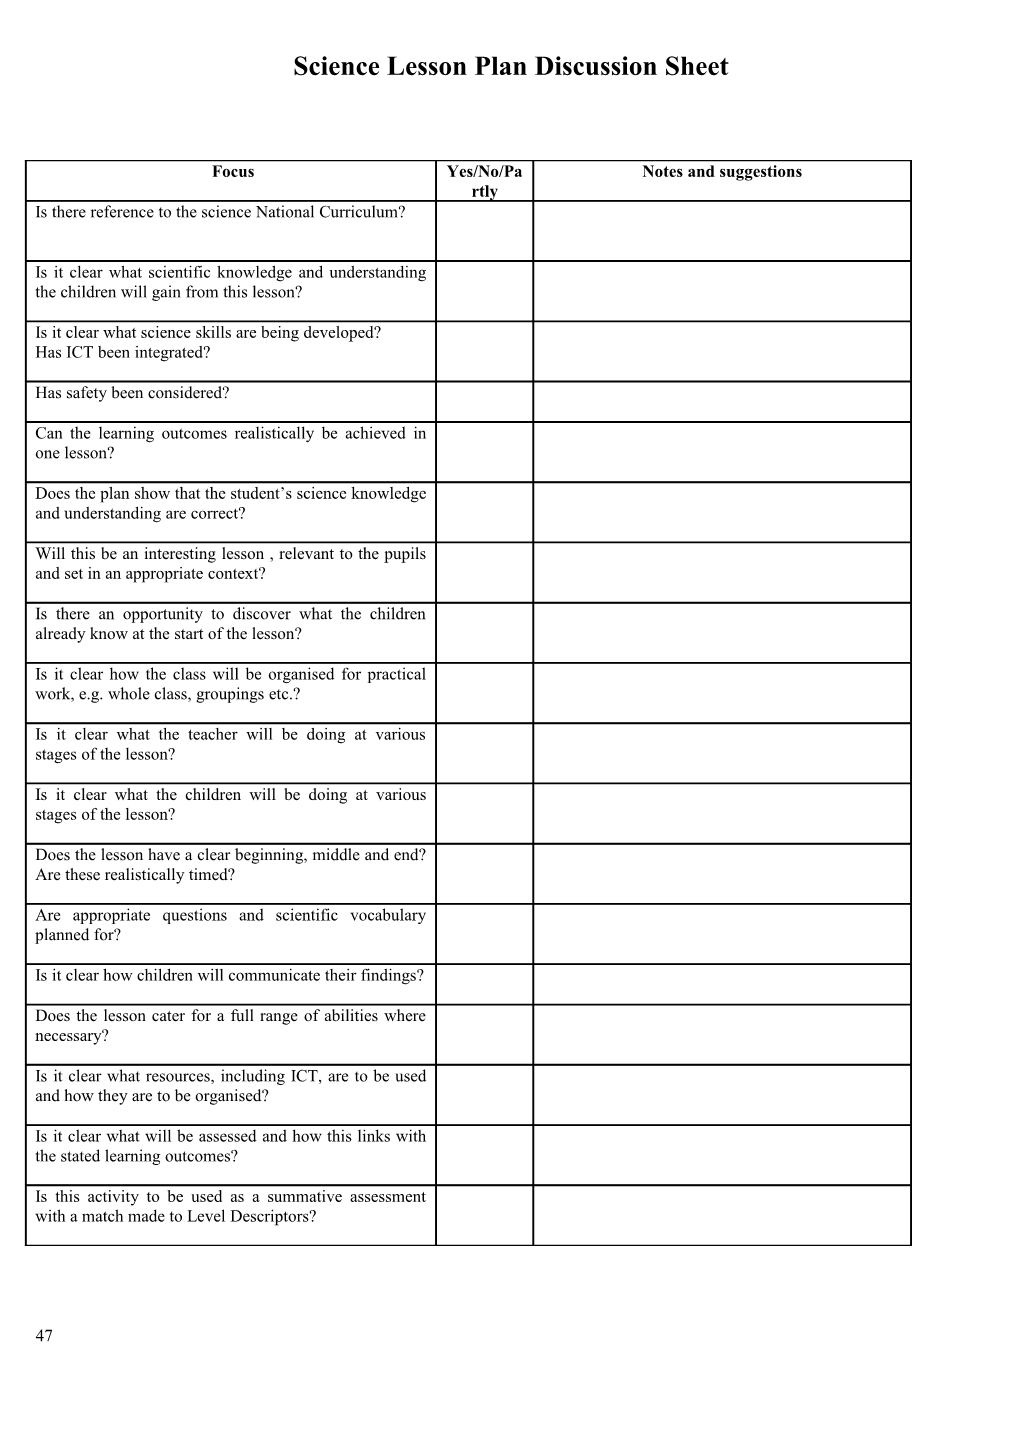 Science Scheme of Work Discussion Sheet Used with Scheme